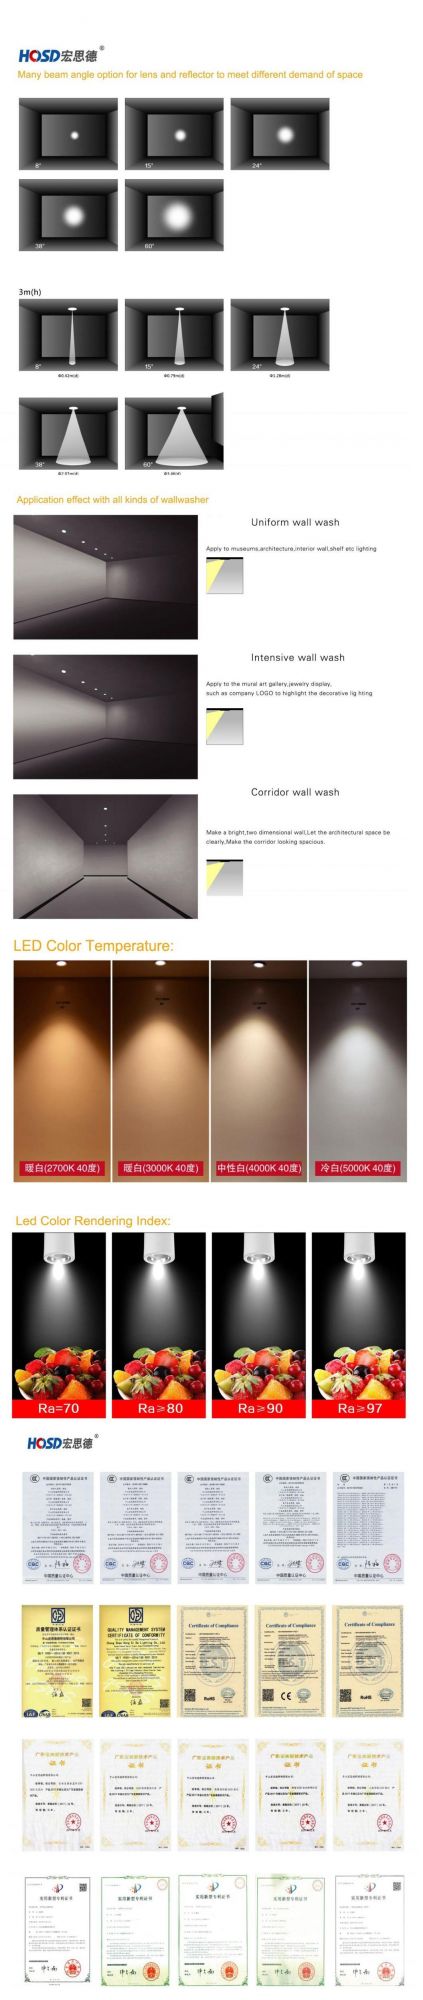 SKD DIY Trim and Module Grille changable Rec Multiple LED Recessed Down Light Spot Light for lighting fixture